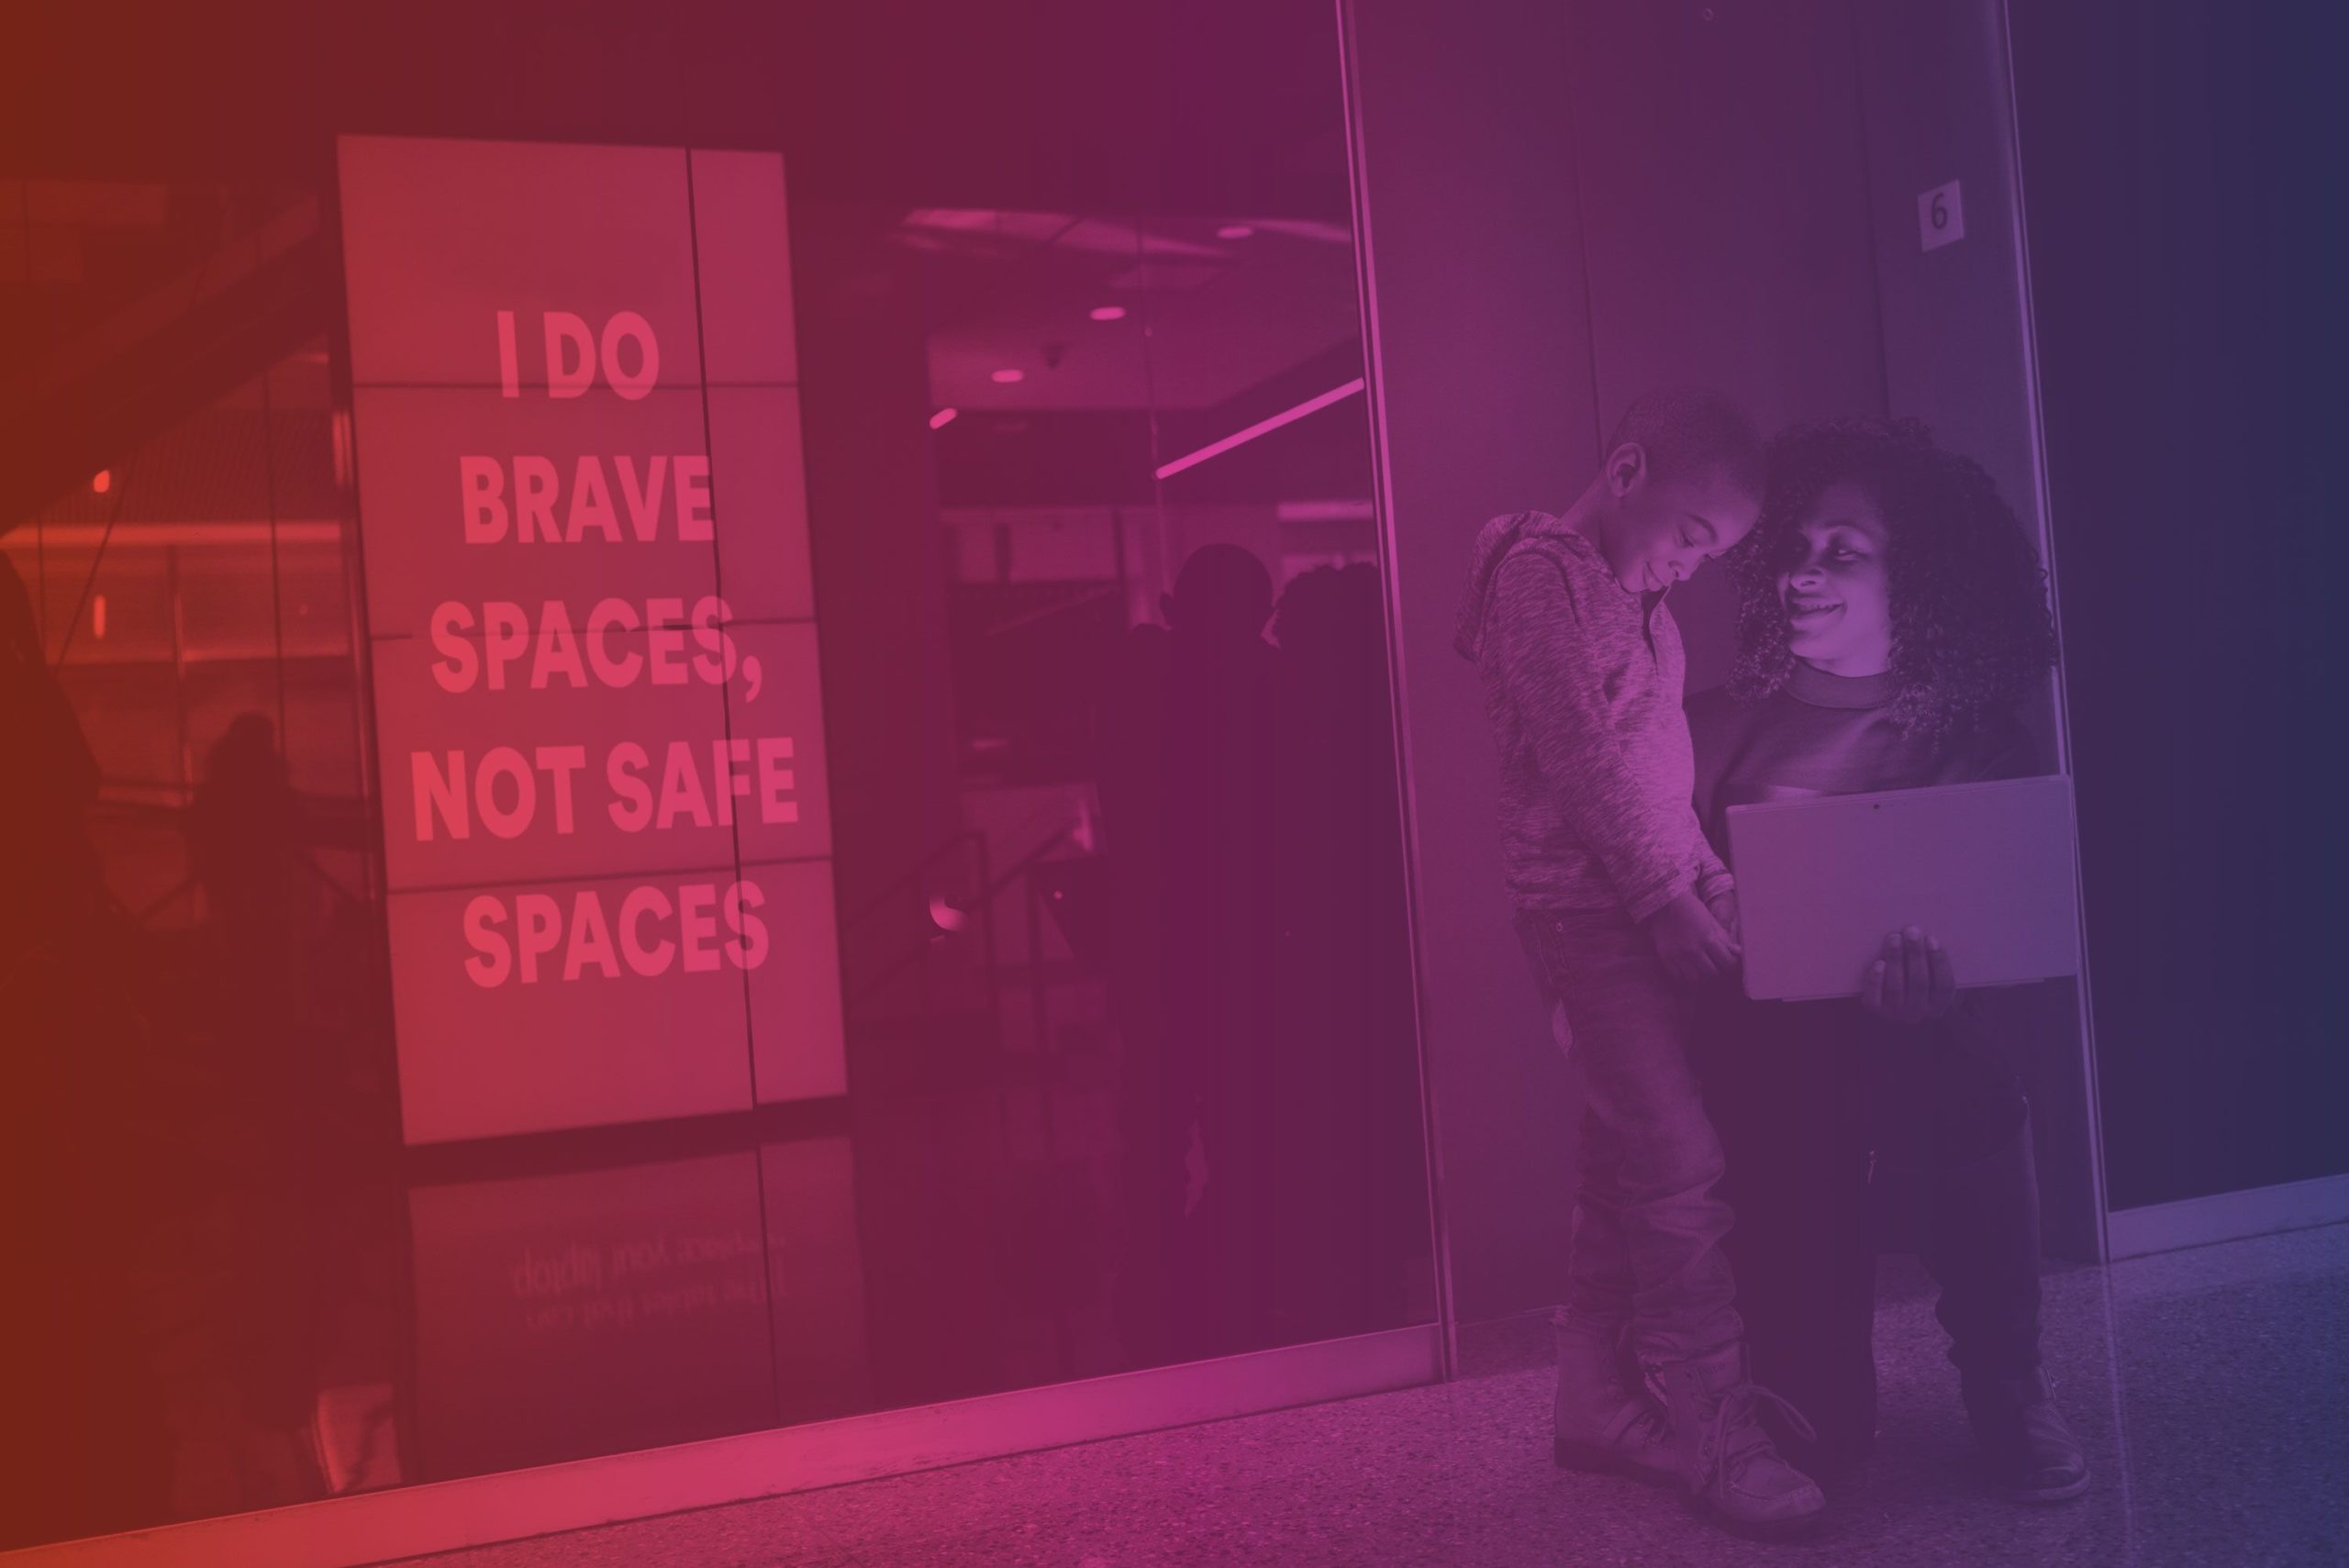 I do brave spaces, not safe spaces